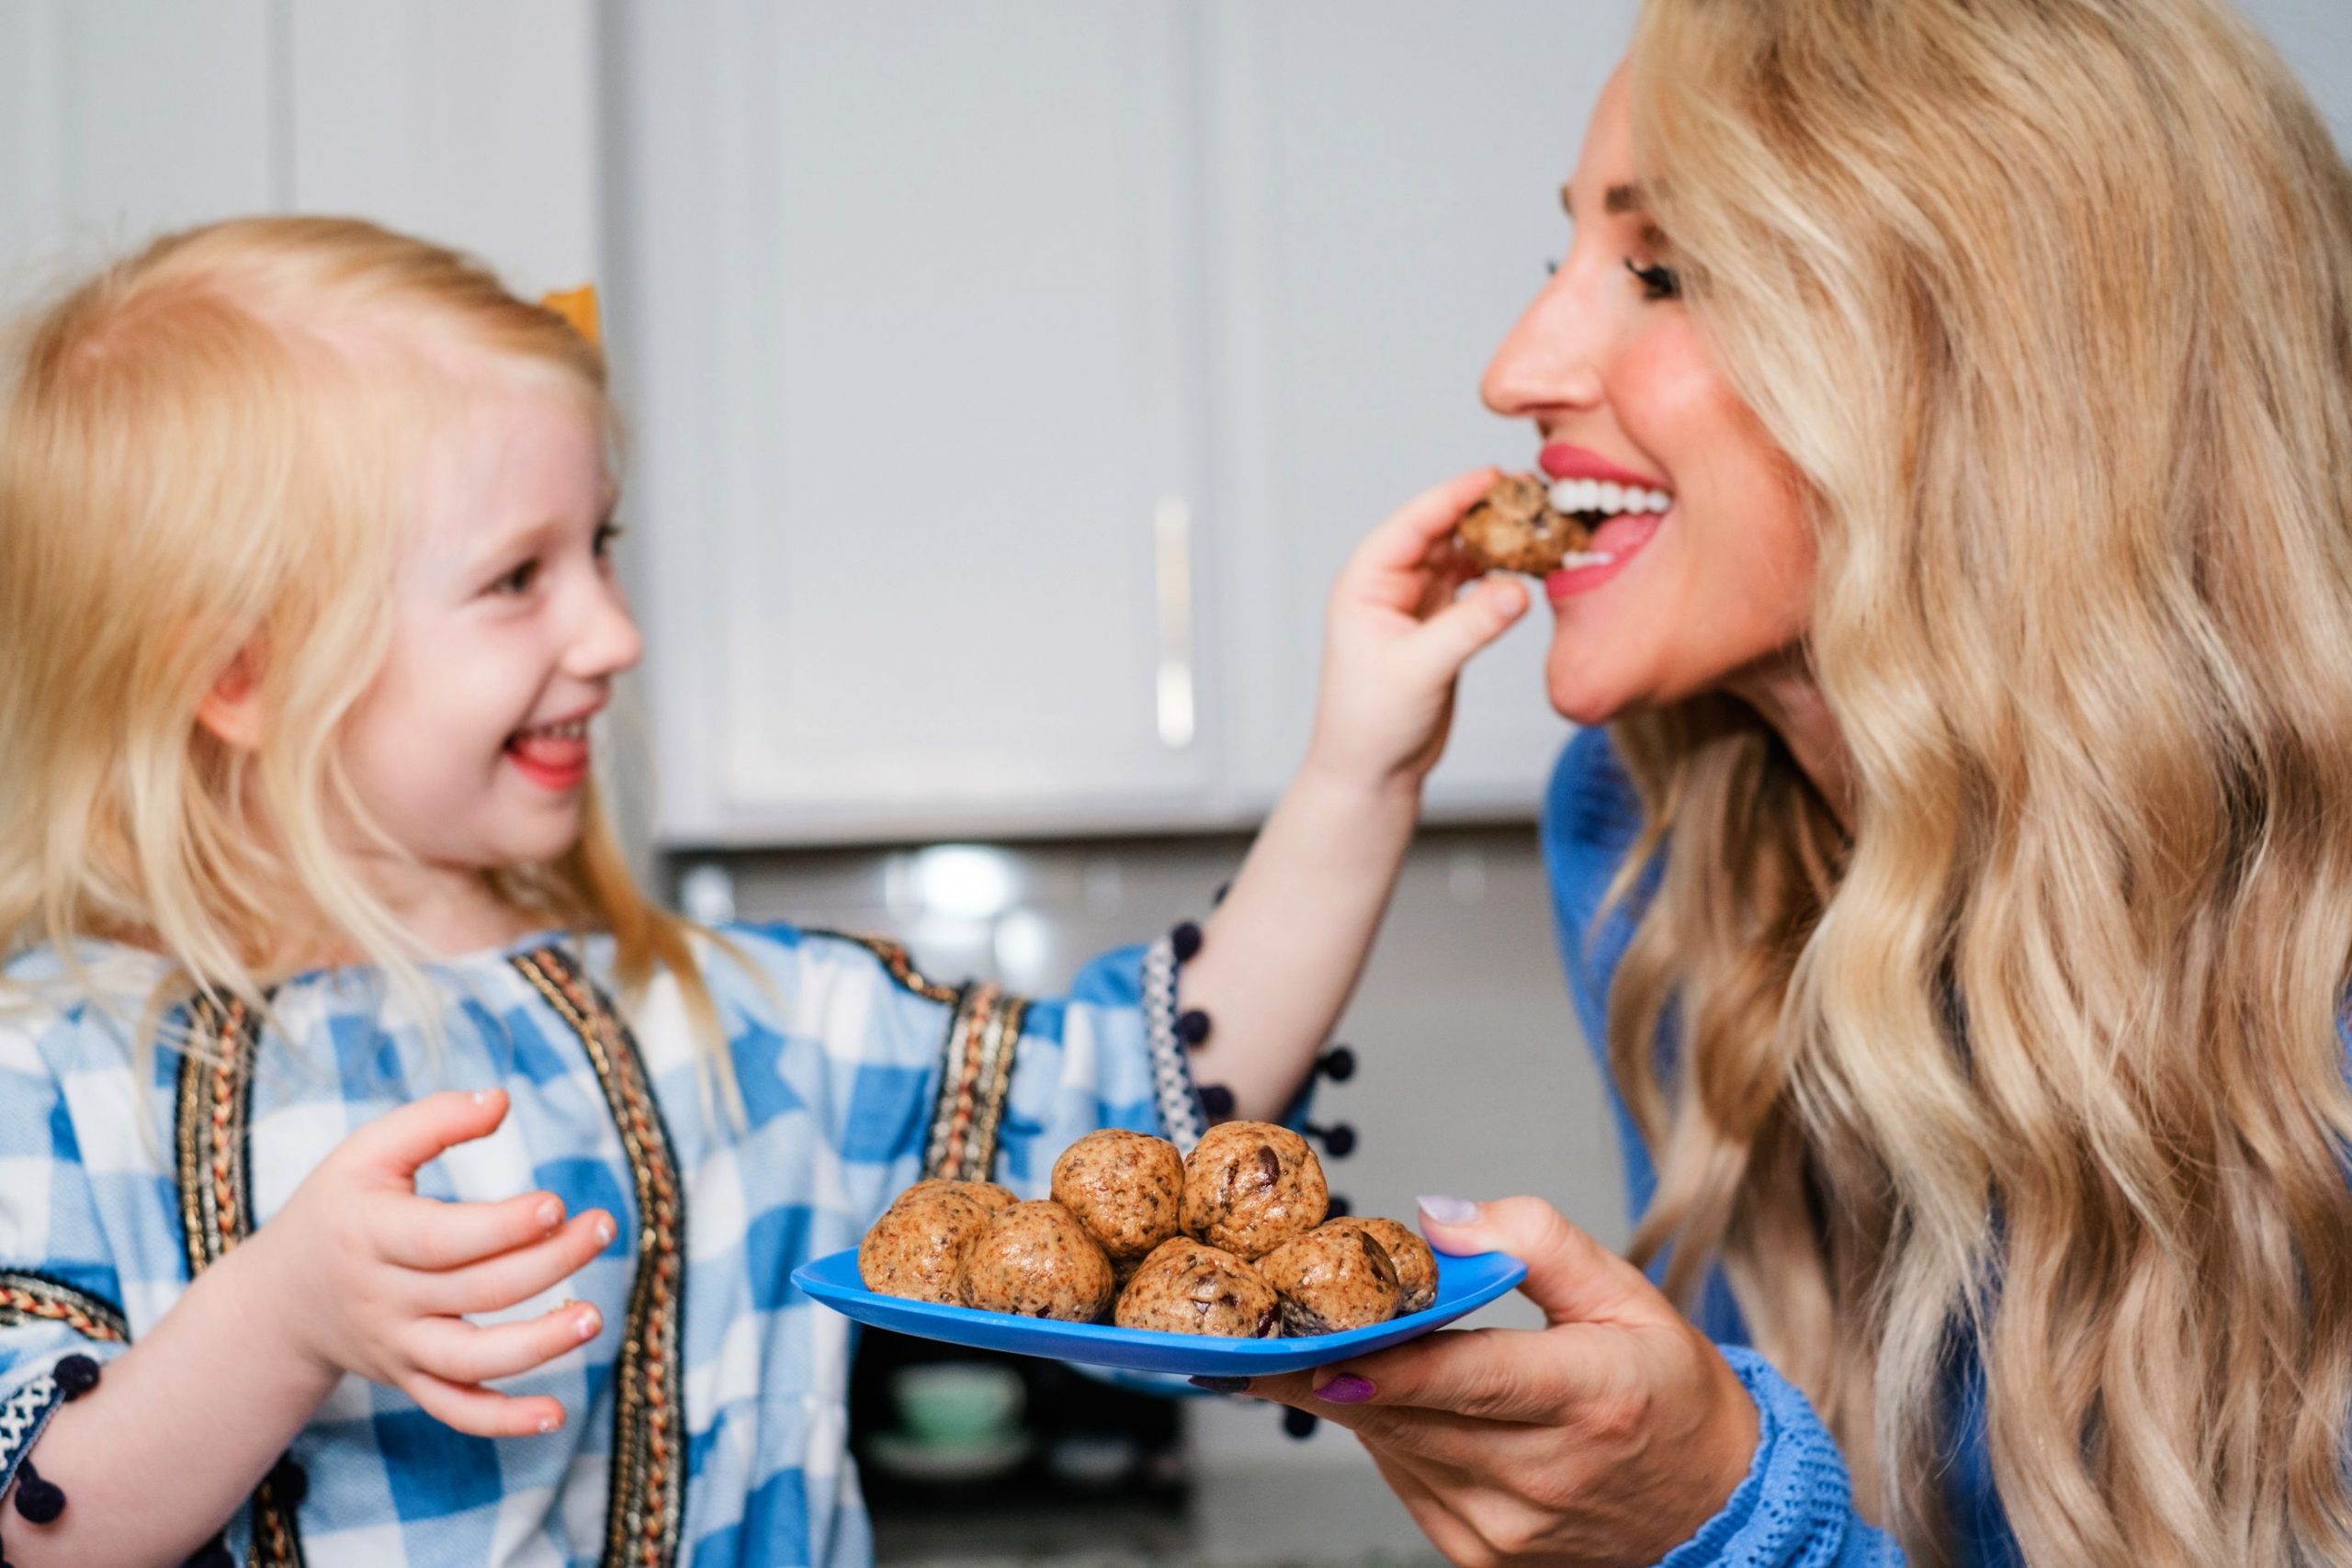 Looking for healthier foods for the whole family? I have you covered! Atlanta Lifestyle Blogger Happily Hughes is sharing her top recipes for healthier foods for the whole family HERE!